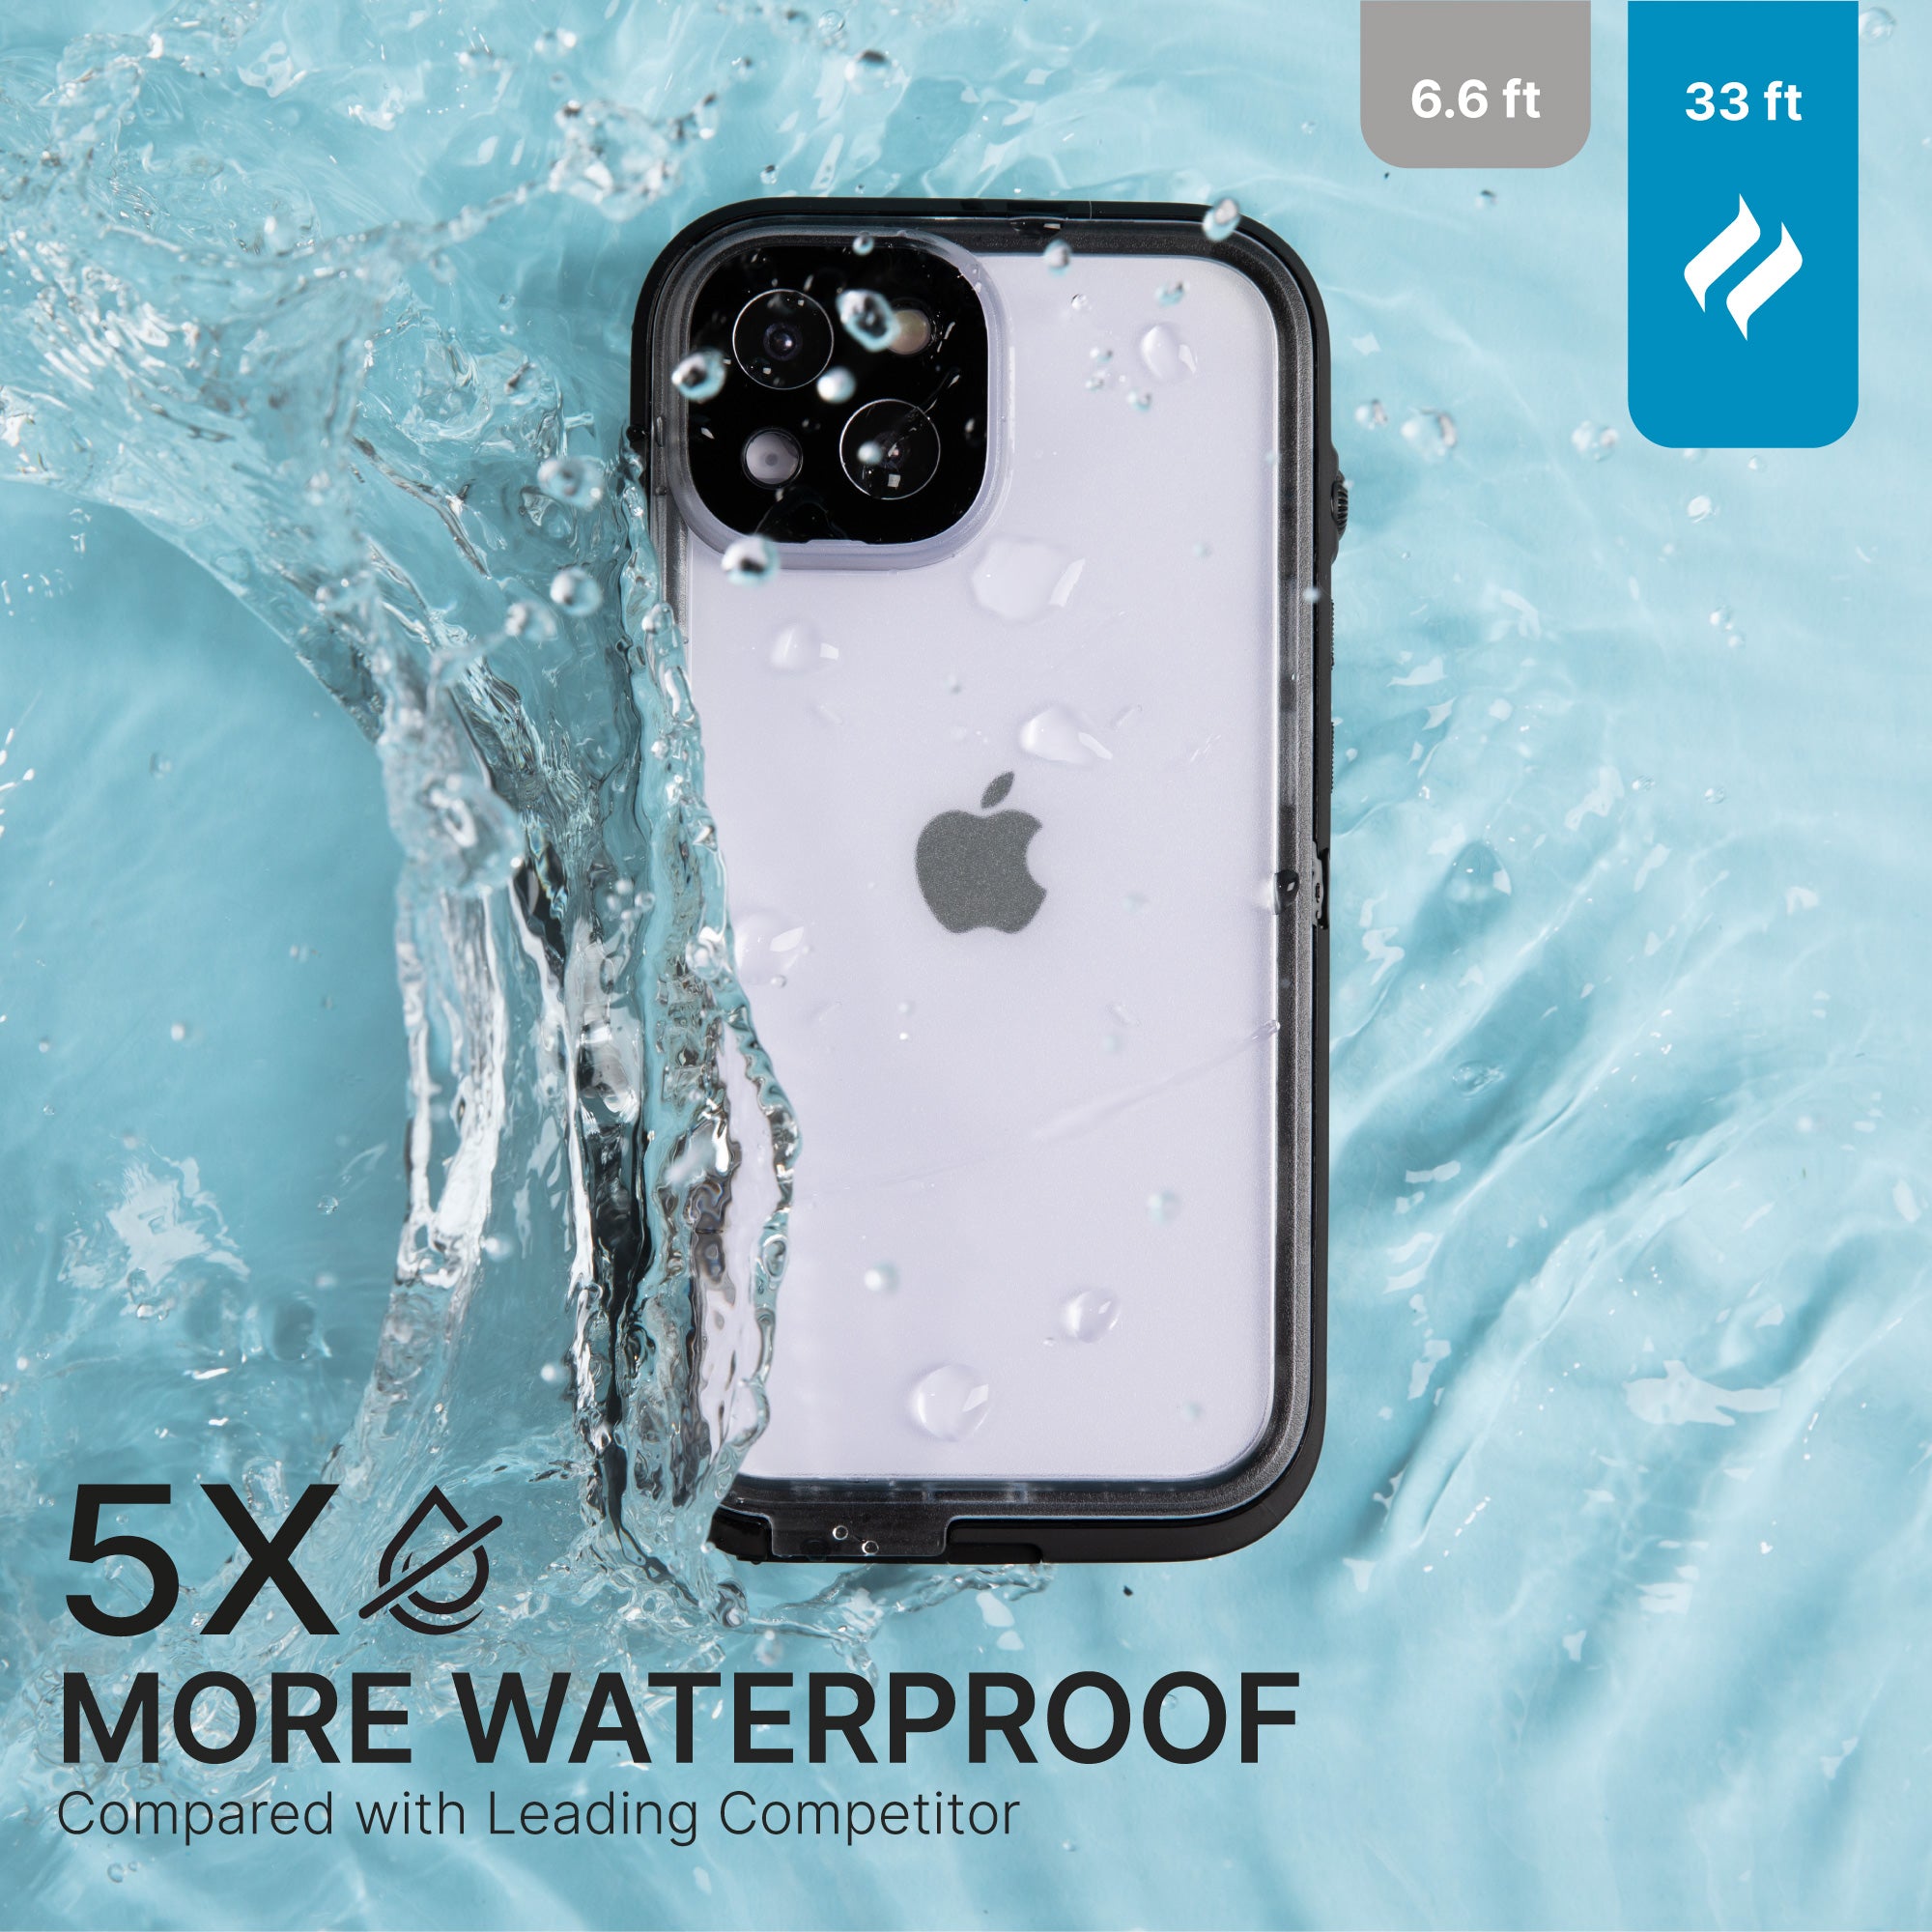 CATIPHO14BLKLP-FBA | Catalyst iPhone 14 Pro Max Waterproof Case Total Protection case splashed in water 5 times more waterproof